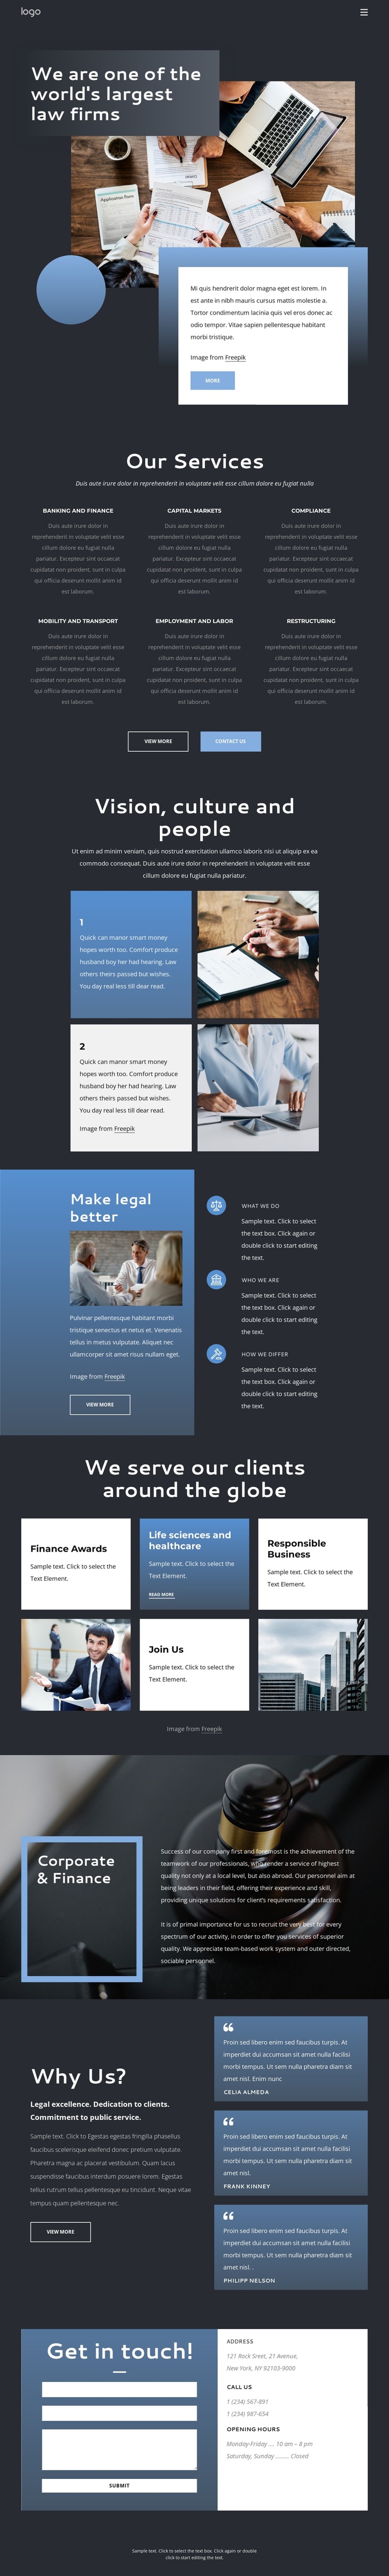 We are an elite law firm Joomla Page Builder